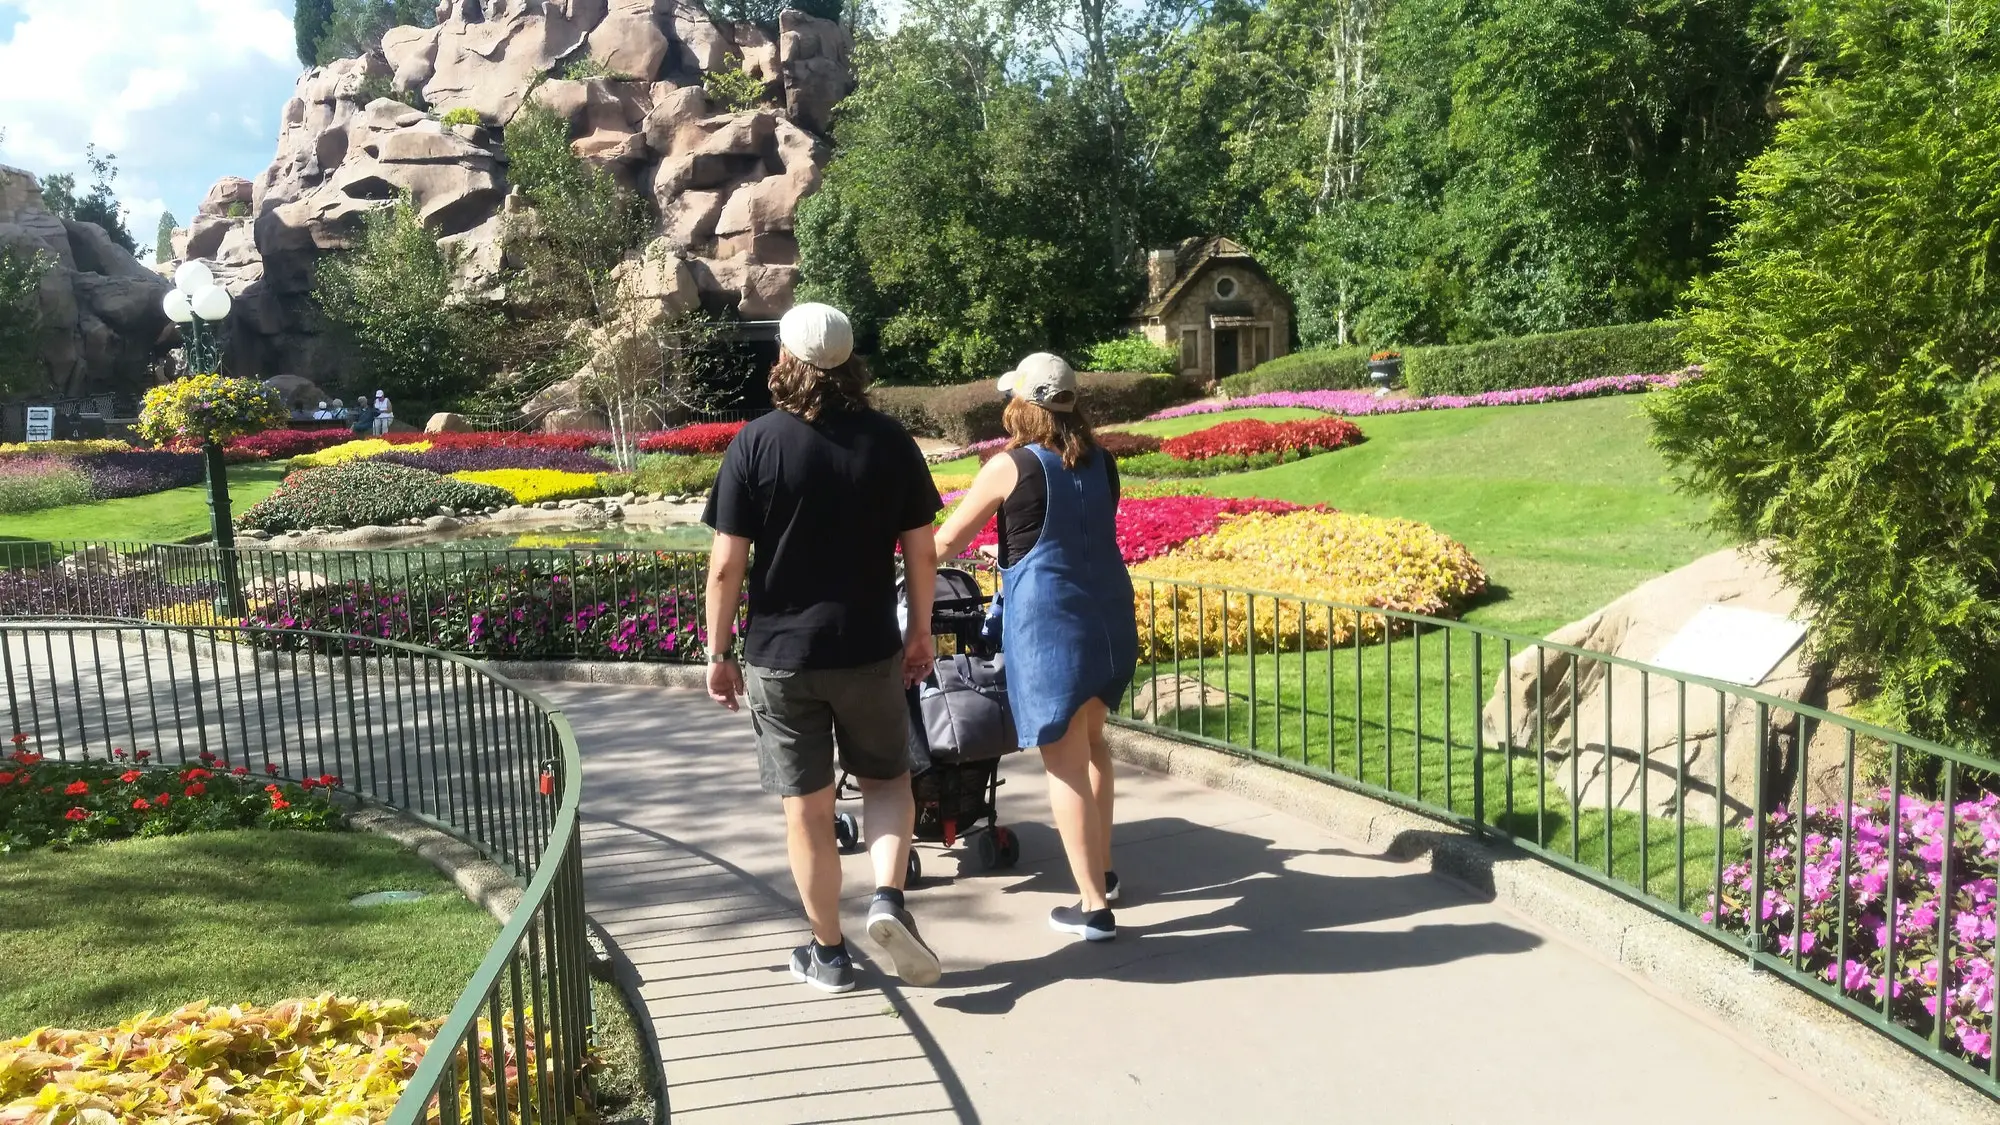 Natures beauty and moments in nature seen in Disneyland by strolling couple with child.